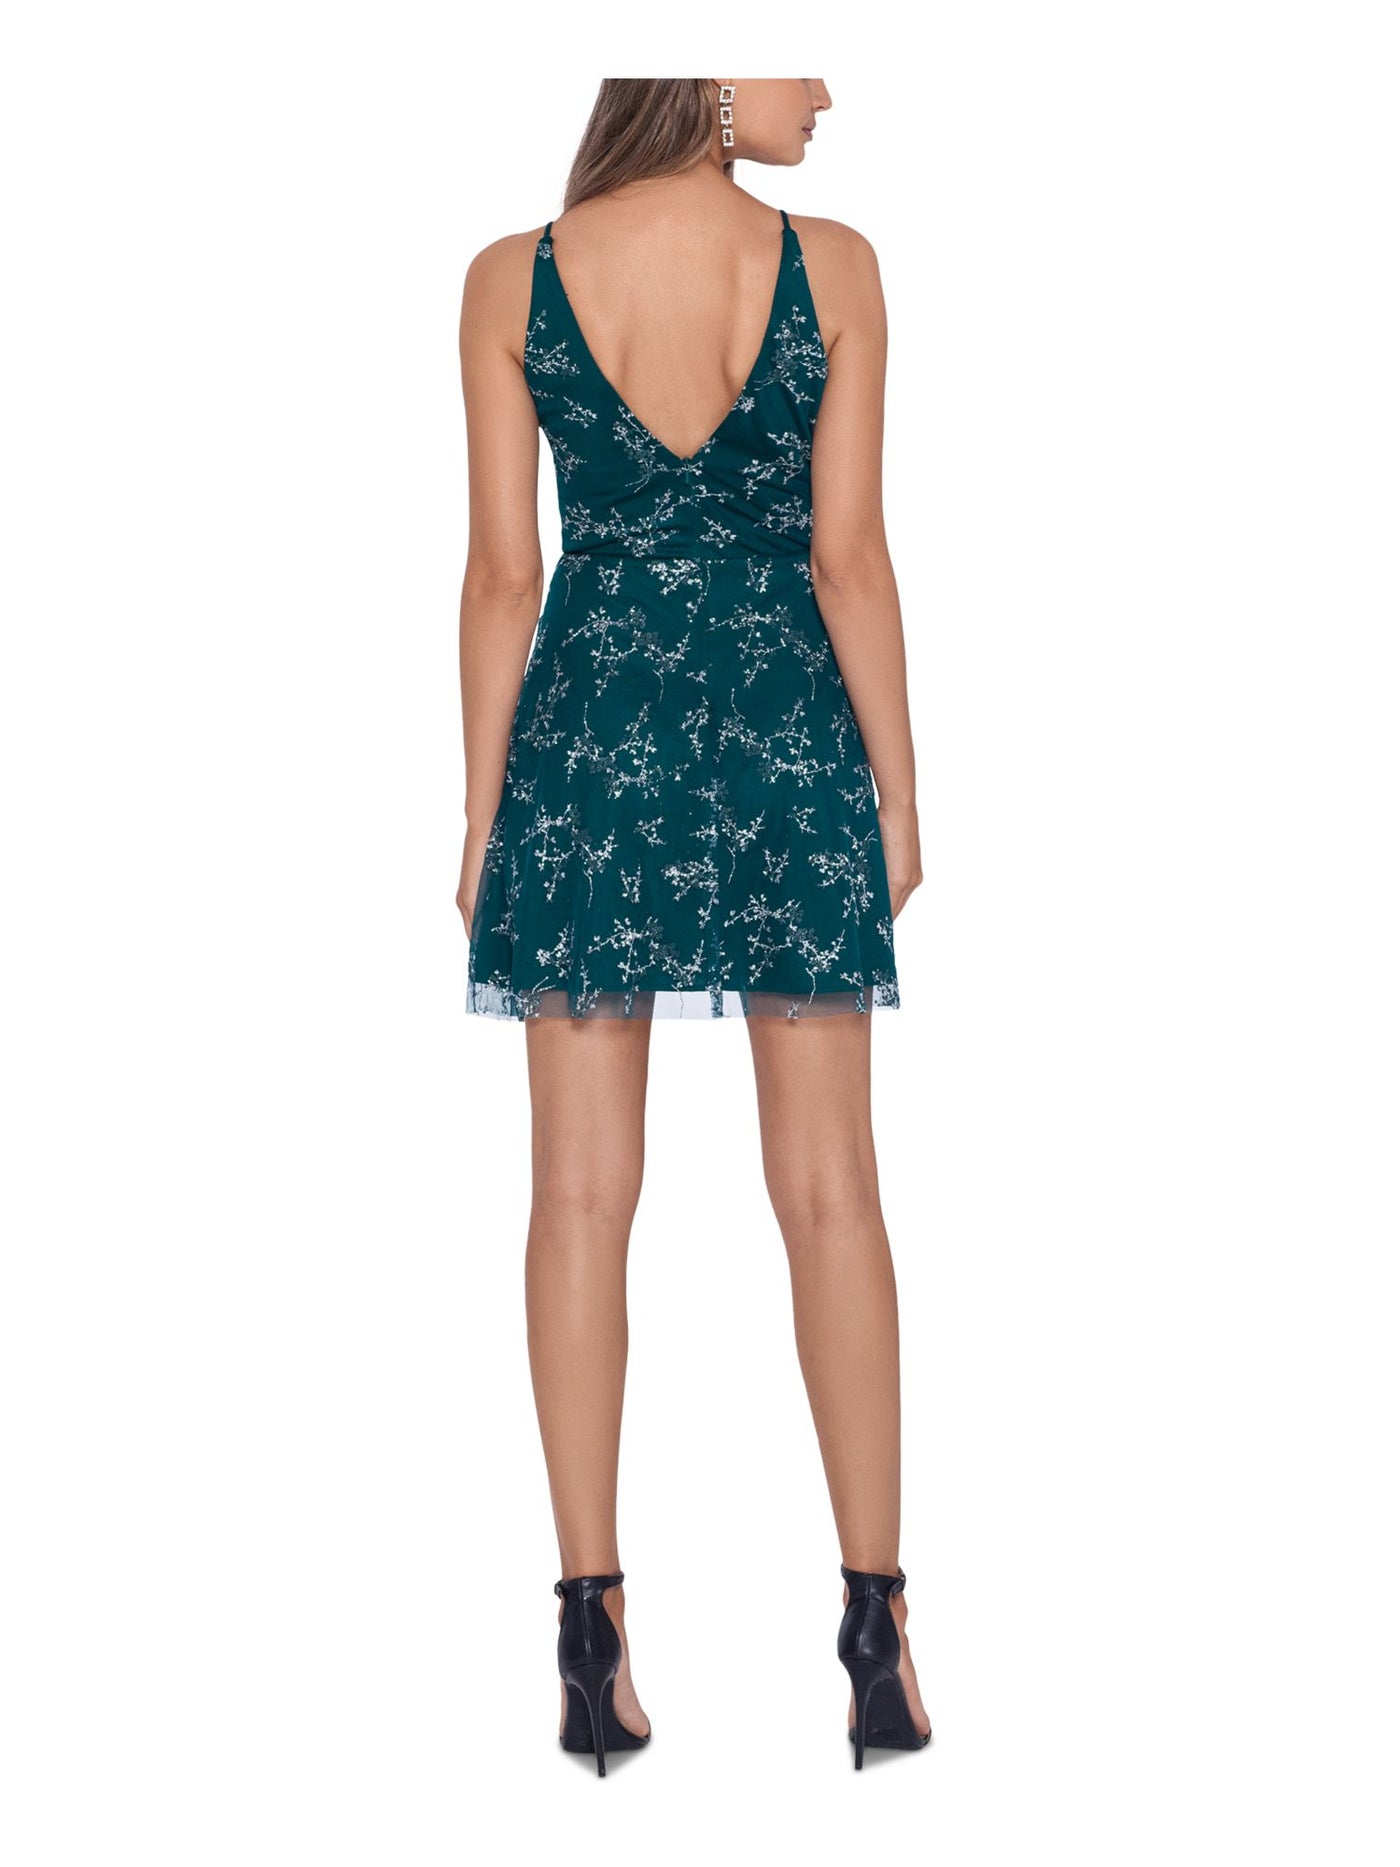 BLONDIE Womens Green Embellished Zippered Sleeveless V Neck Short Party Fit + Flare Dress Juniors 15